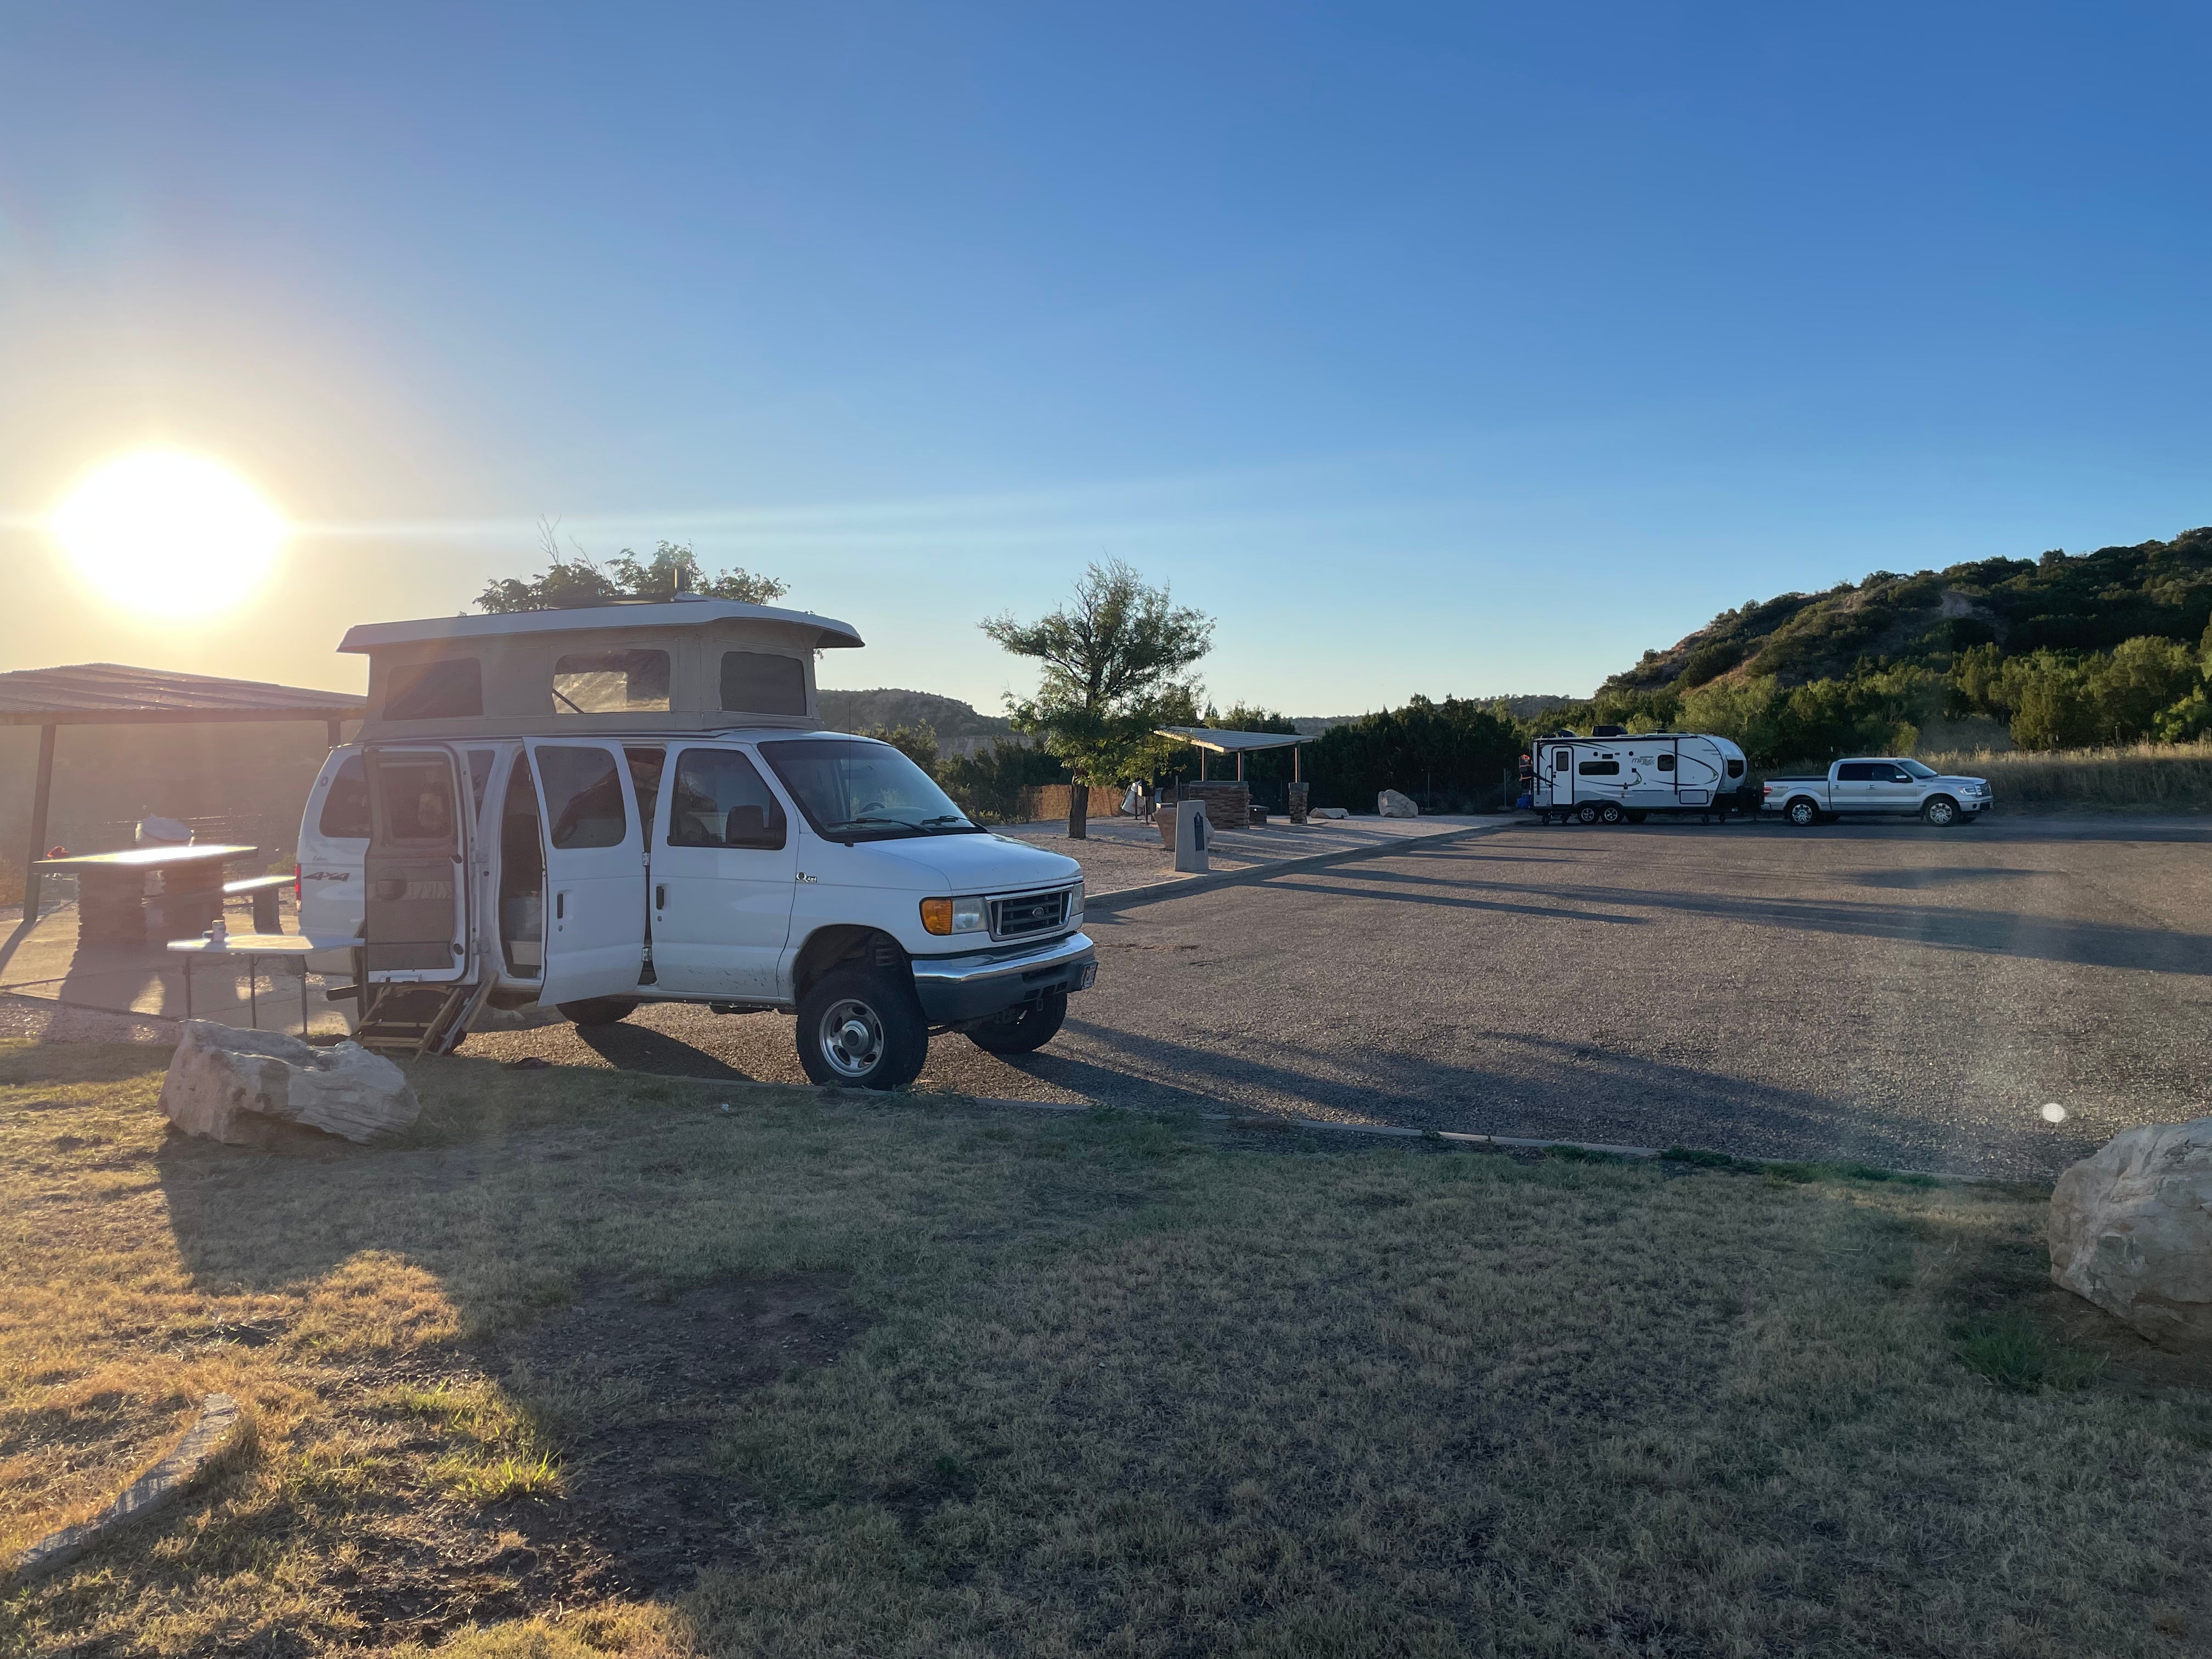 Camper submitted image from SH 207 Palo Duro Canyon Overlook - 5